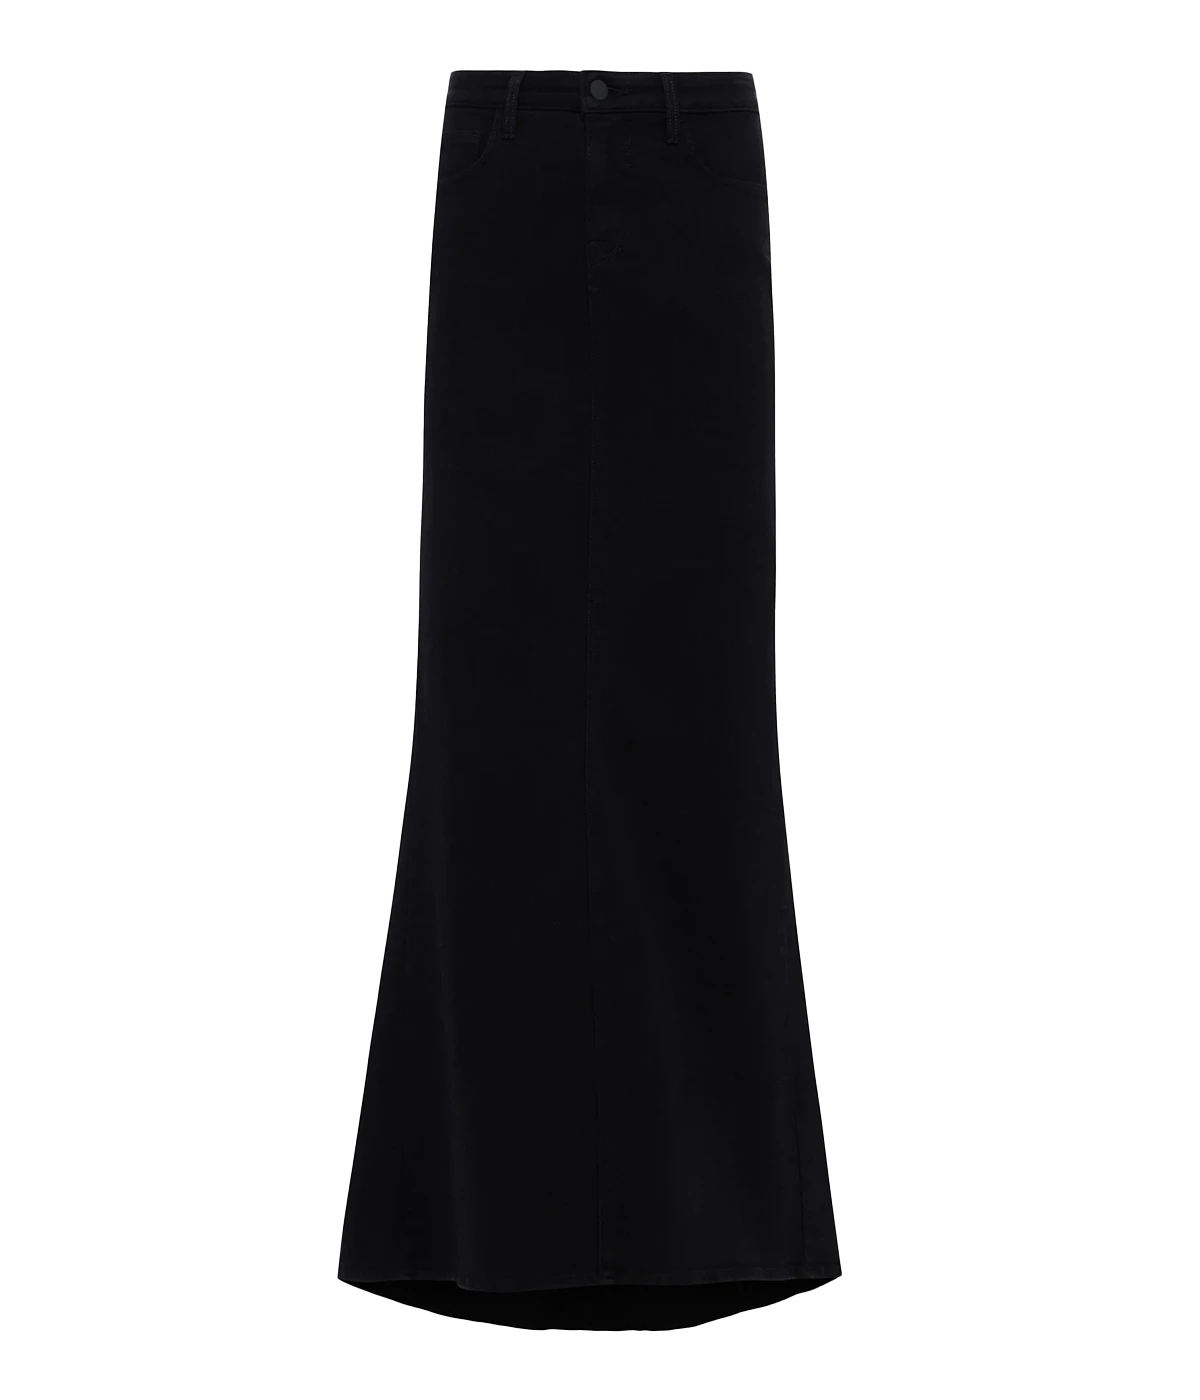 A trendy and elevated basic denim maxi skirt in black, featuring a high waistline, mermaid flare and soft premium stretch denim. Classic five pocket constructions. comfortable, made internationally. 